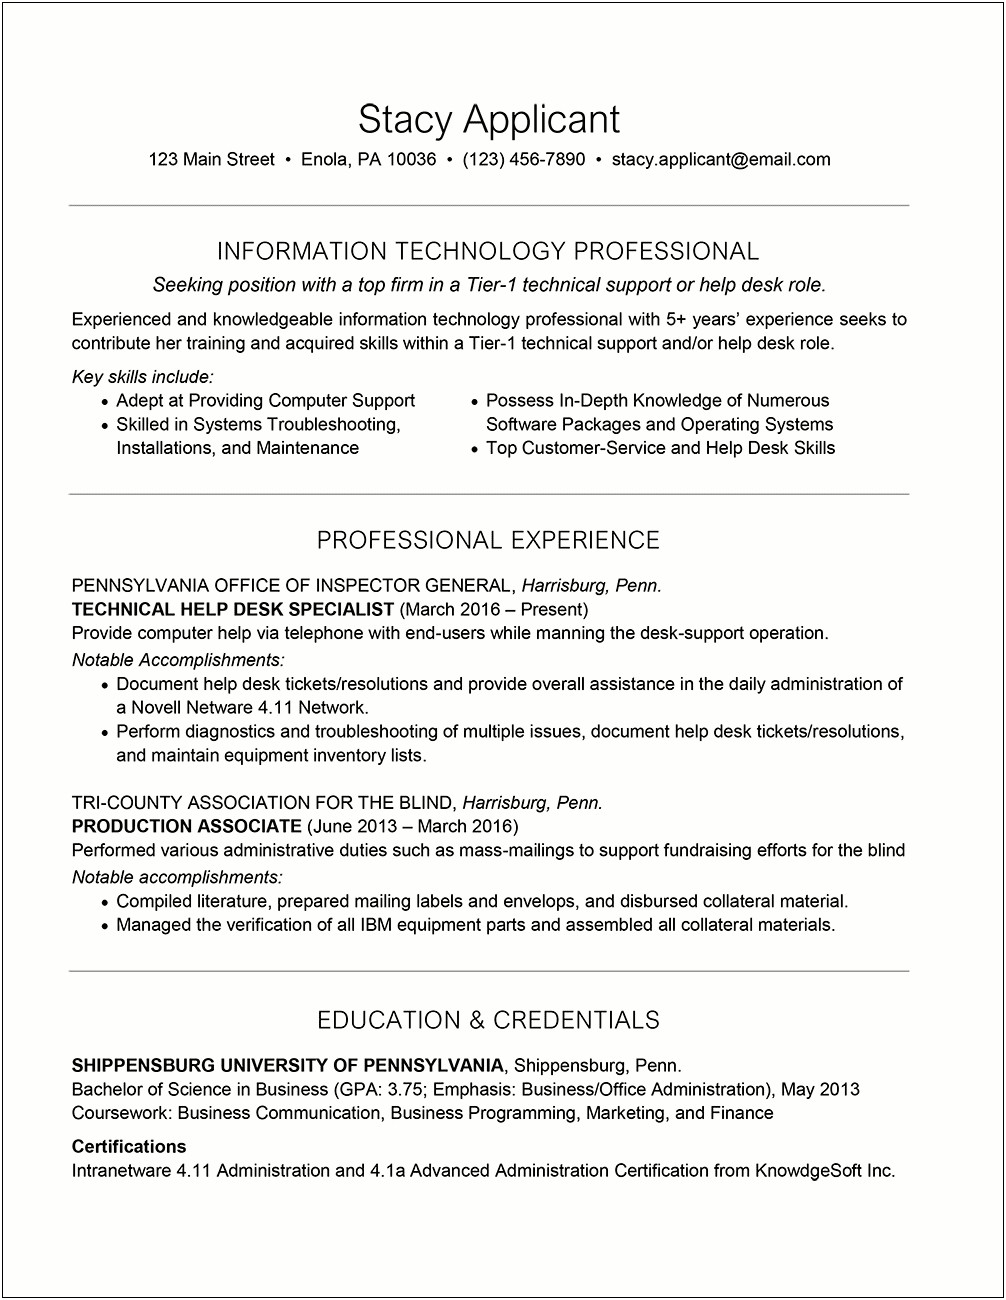 Technology Resume Summary Statement Examples